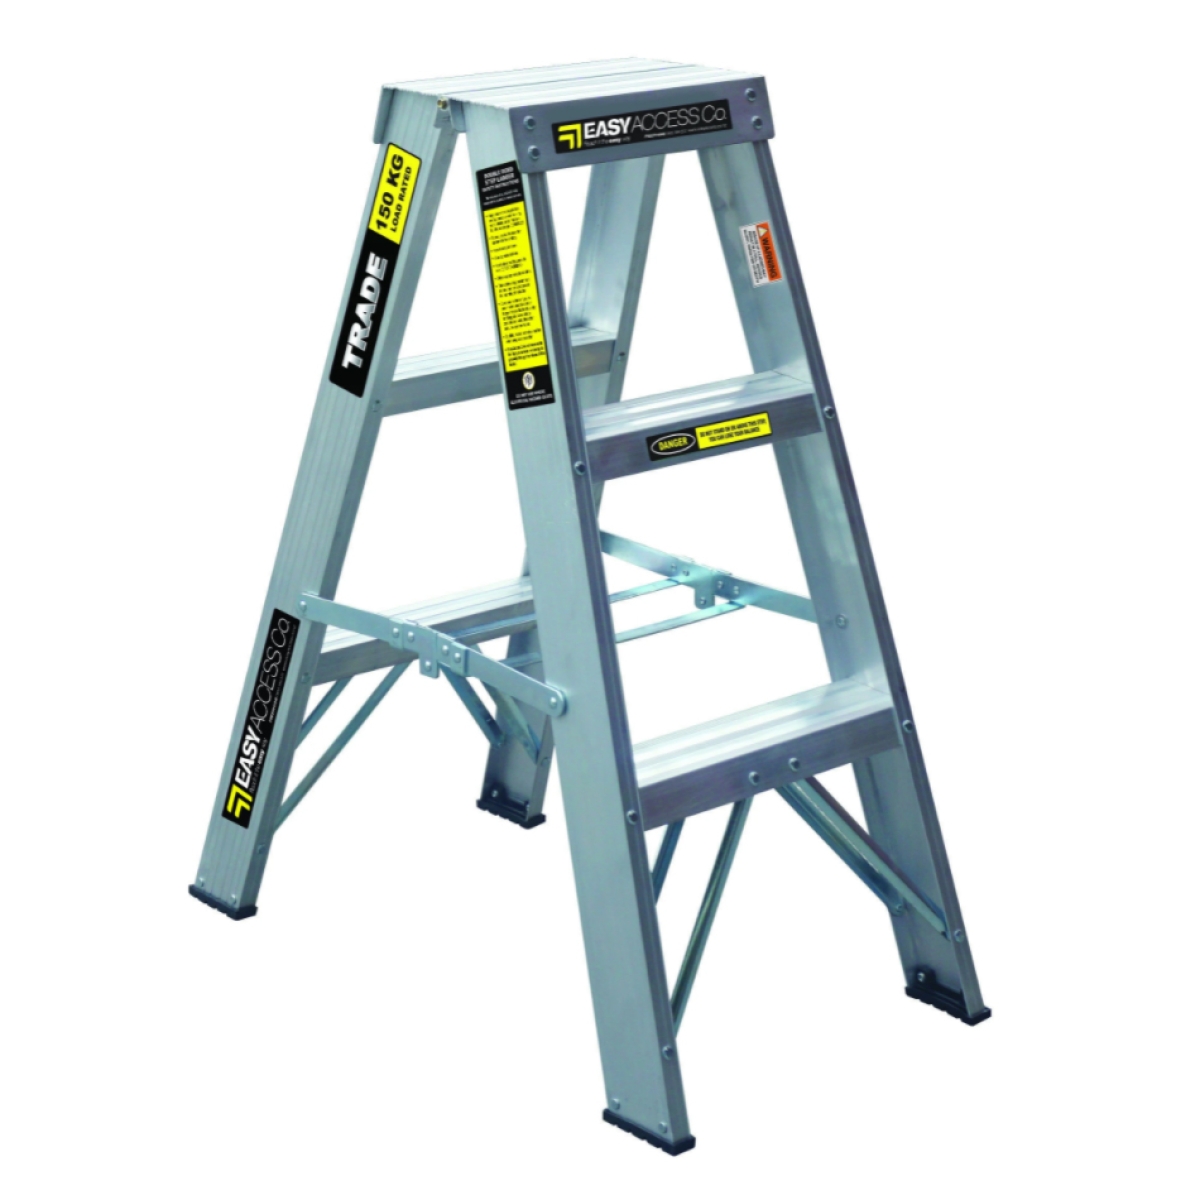 Easy Access Double Sided Step Ladder 3-Step